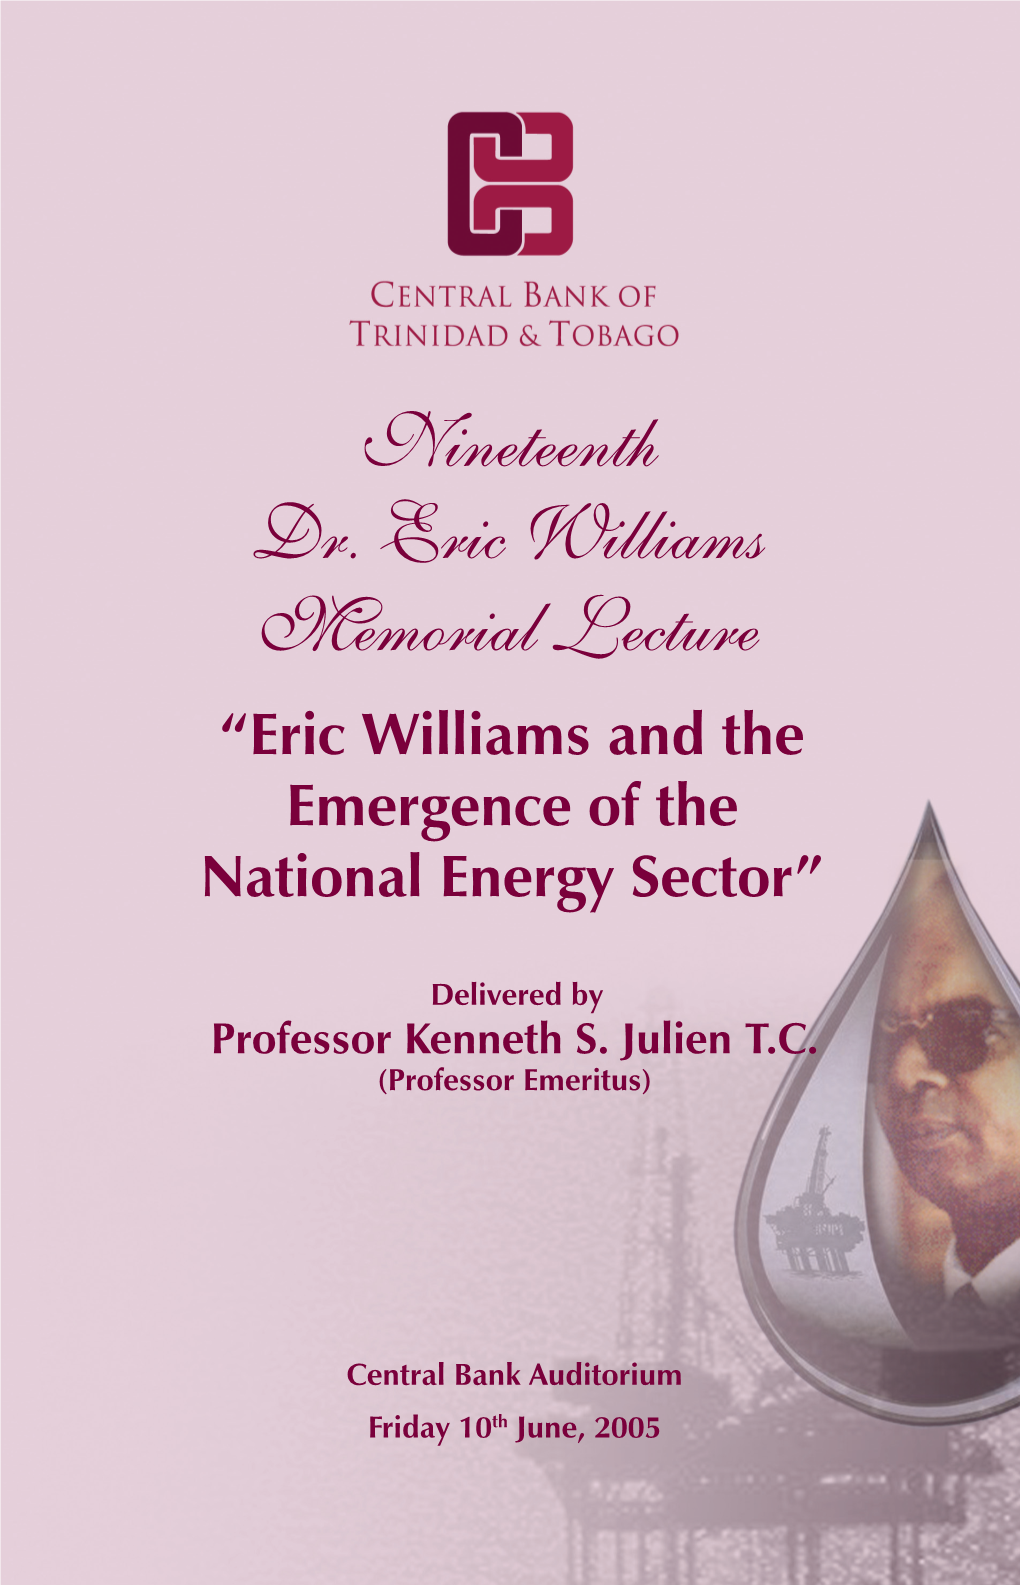 Nineteenth Dr. Eric Williams Memorial Lecture “Eric Williams and the Emergence of the National Energy Sector”